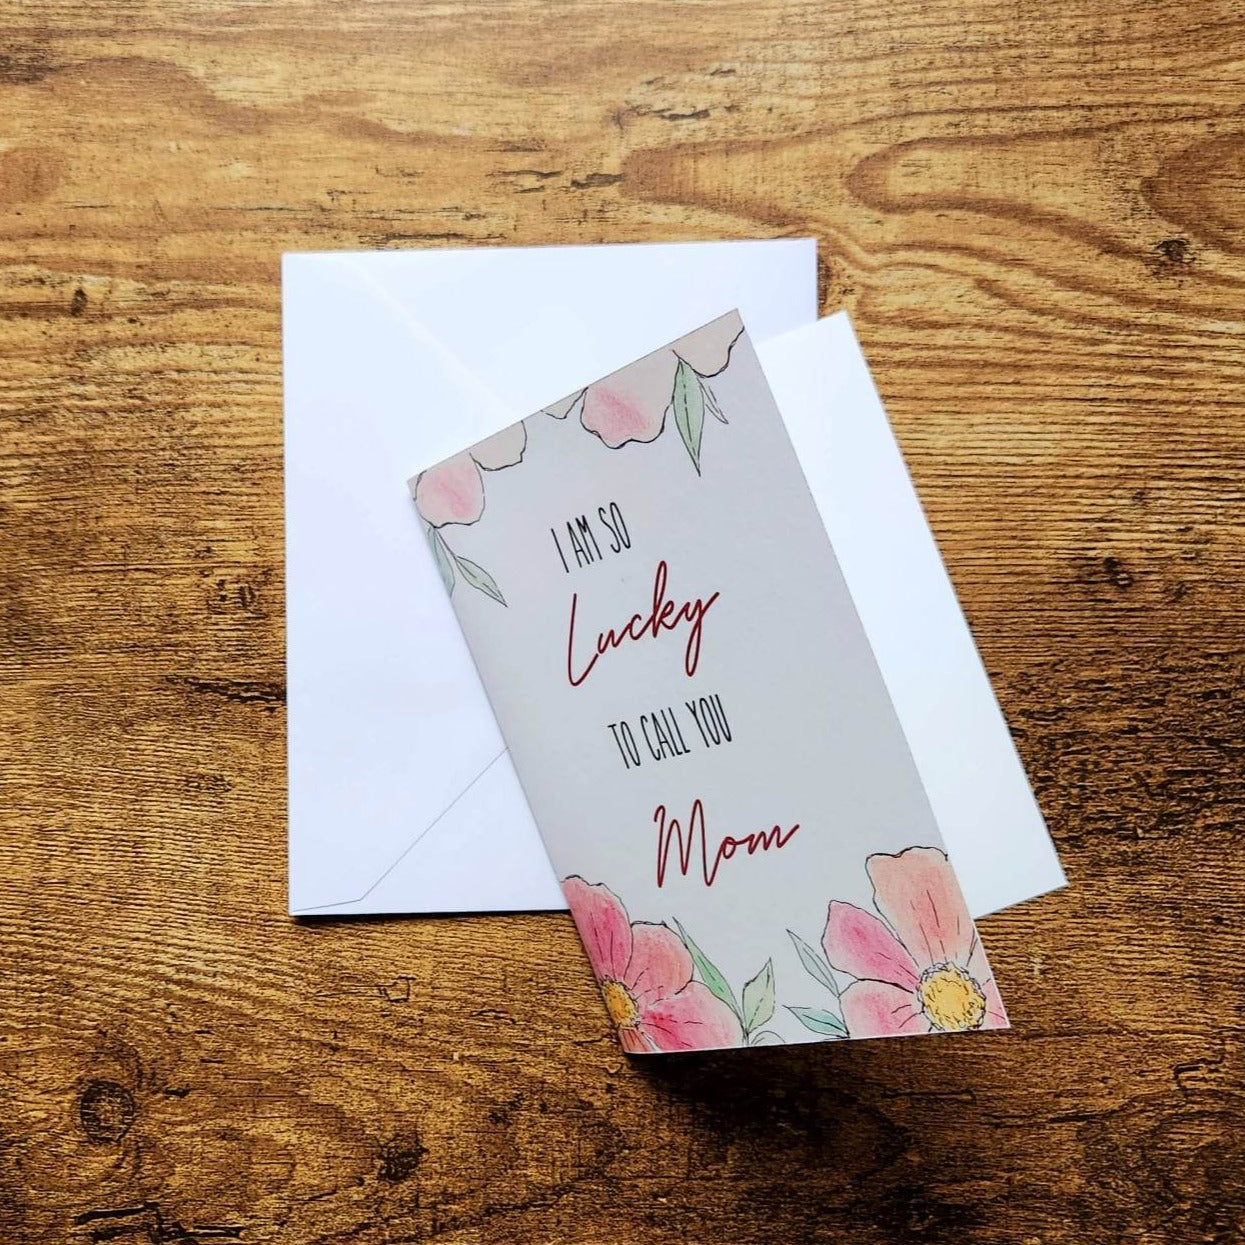 I am so lucky to call you mom, Mother's Day card, Gratitude card for mom, Lucky to have you, Grateful for you mom, Happy Mother's Day